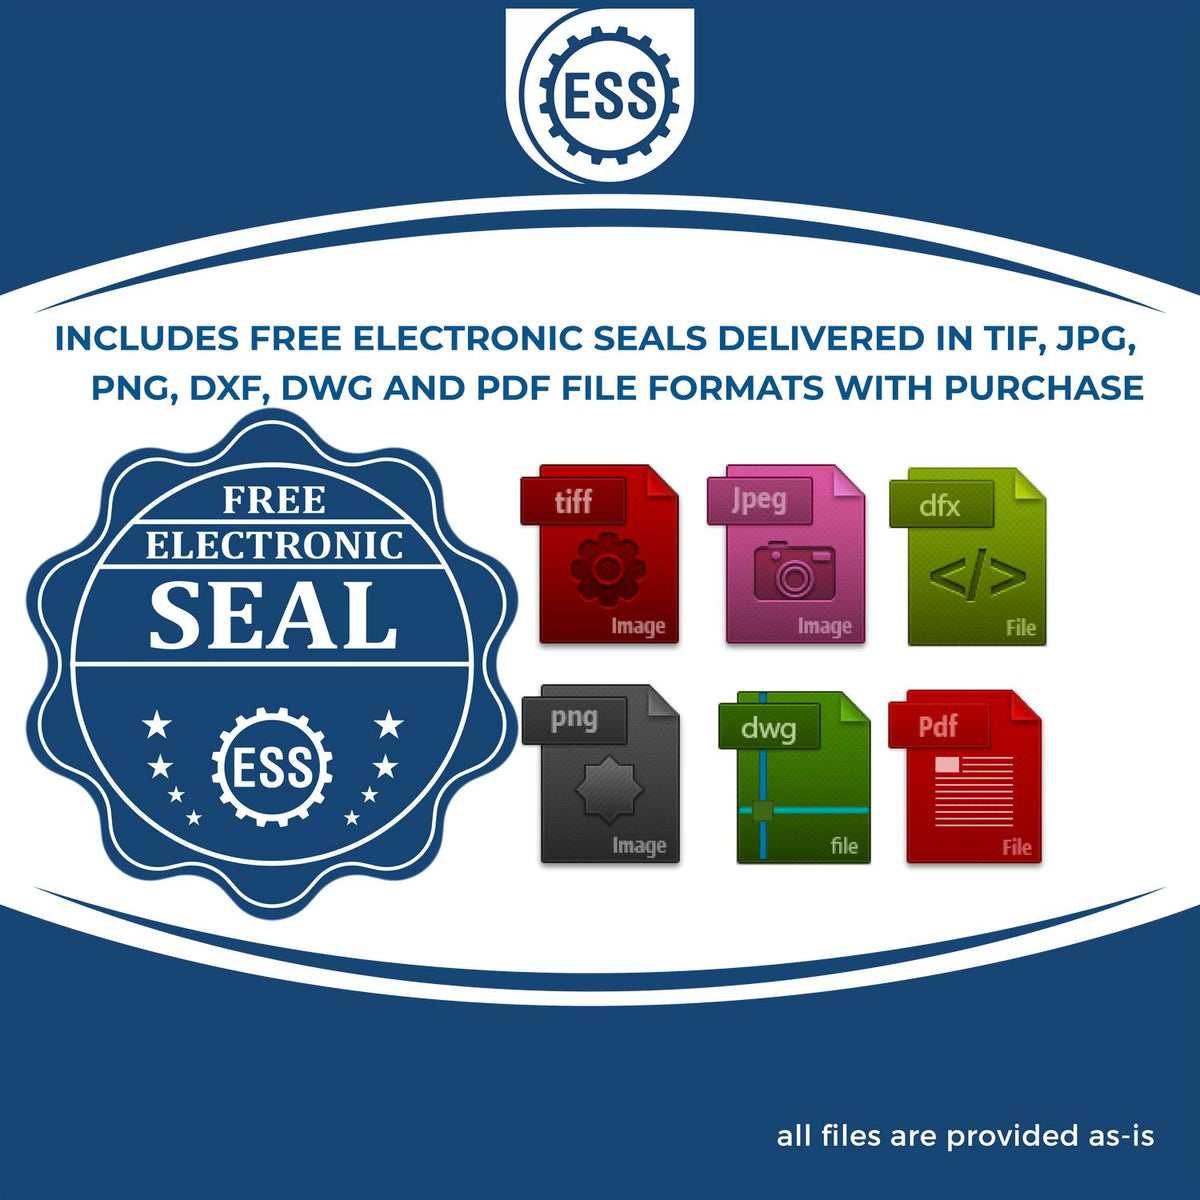 An infographic for the free electronic seal for the District of Columbia Professional Engineer Seal Stamp illustrating the different file type icons such as DXF, DWG, TIF, JPG and PNG.